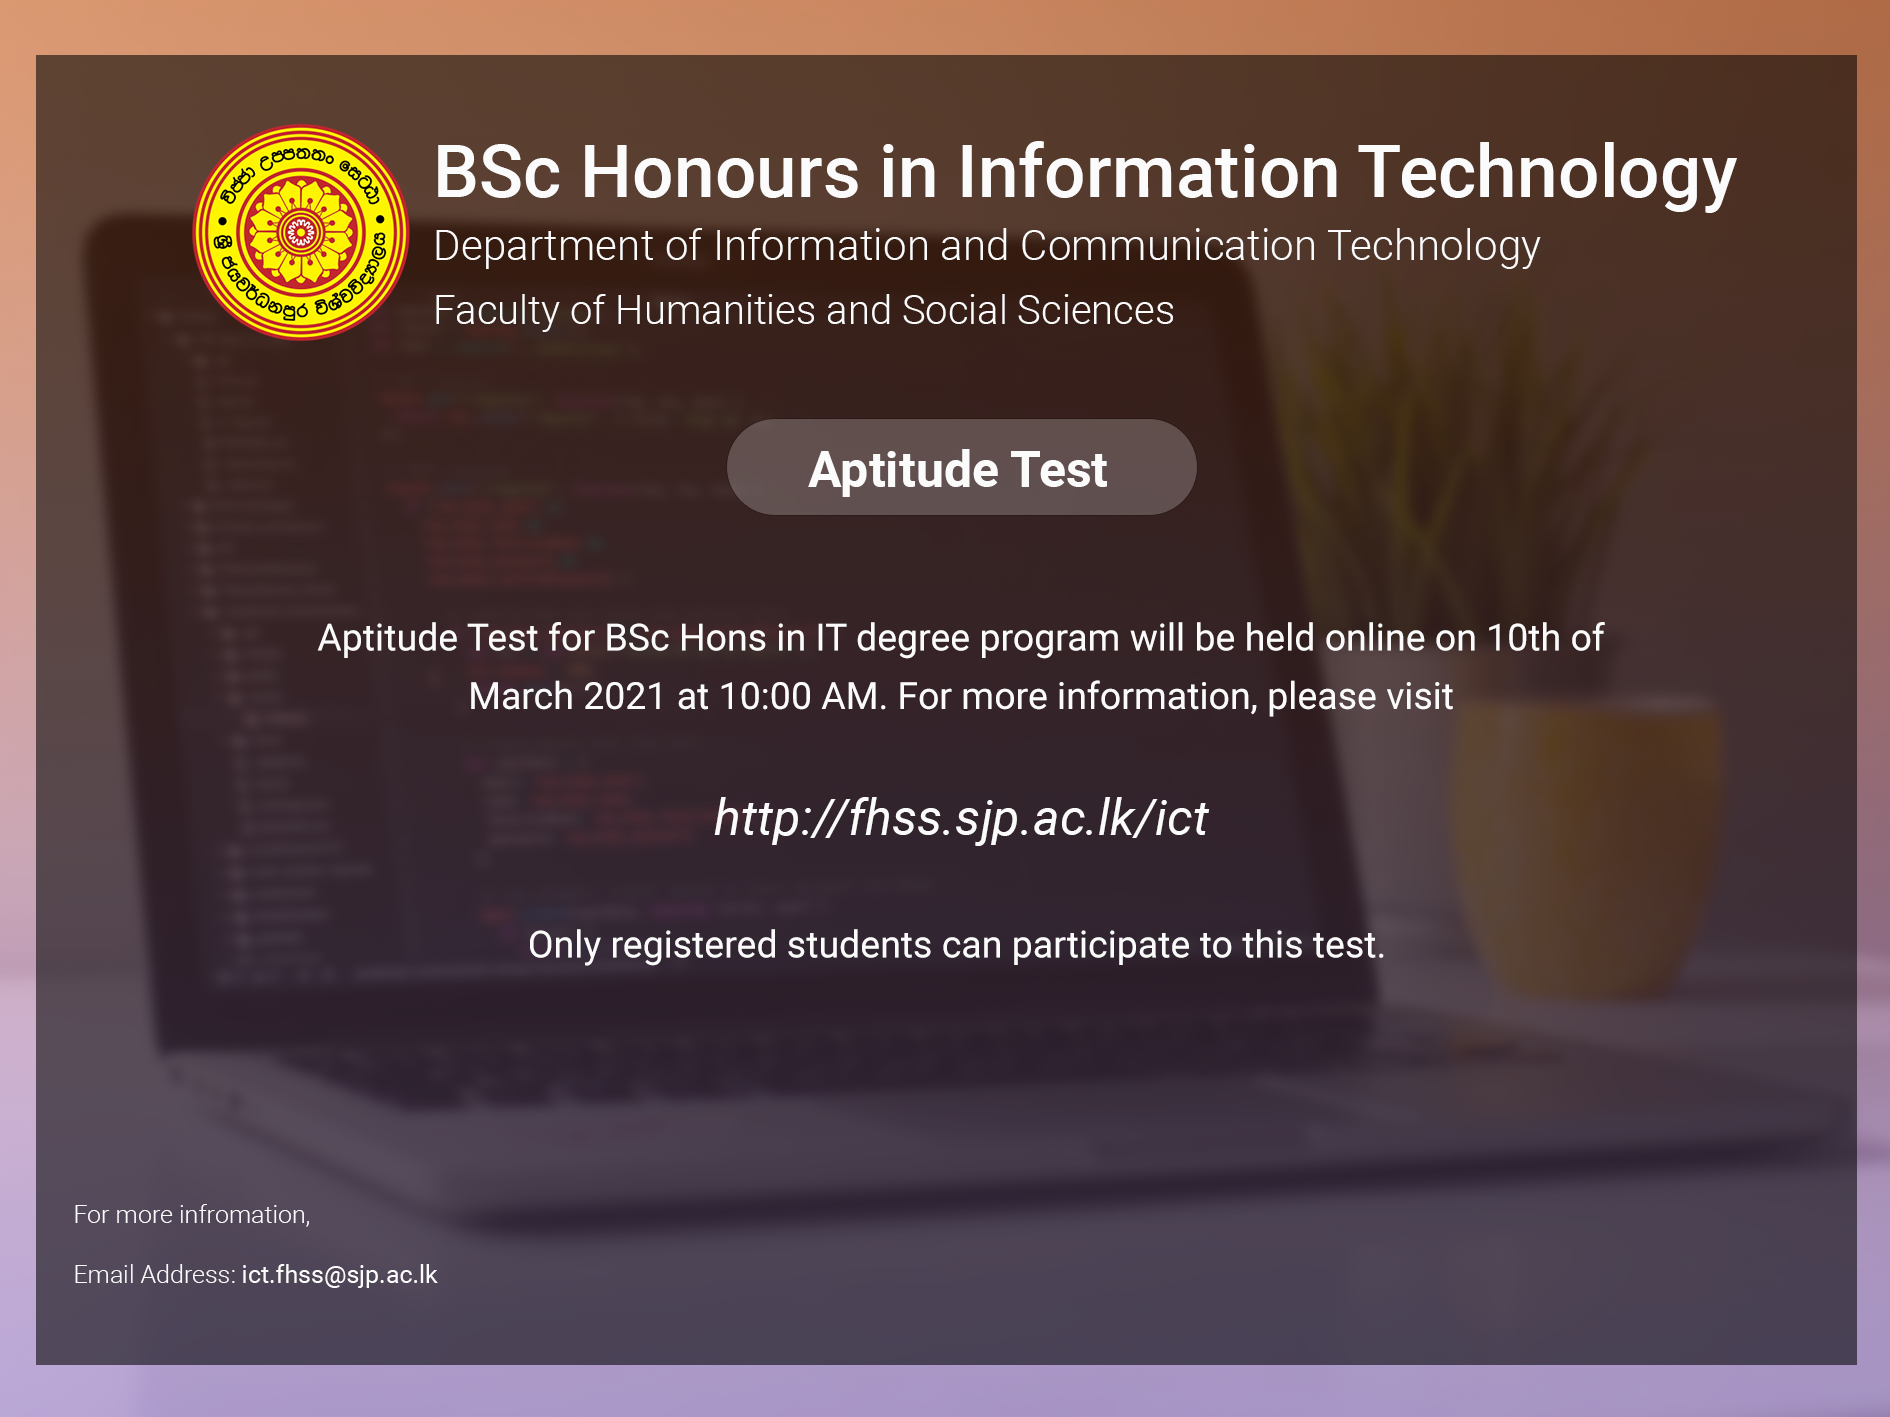 bsc-hons-in-it-aptitude-test-2021-faculty-of-humanities-and-social-sciences